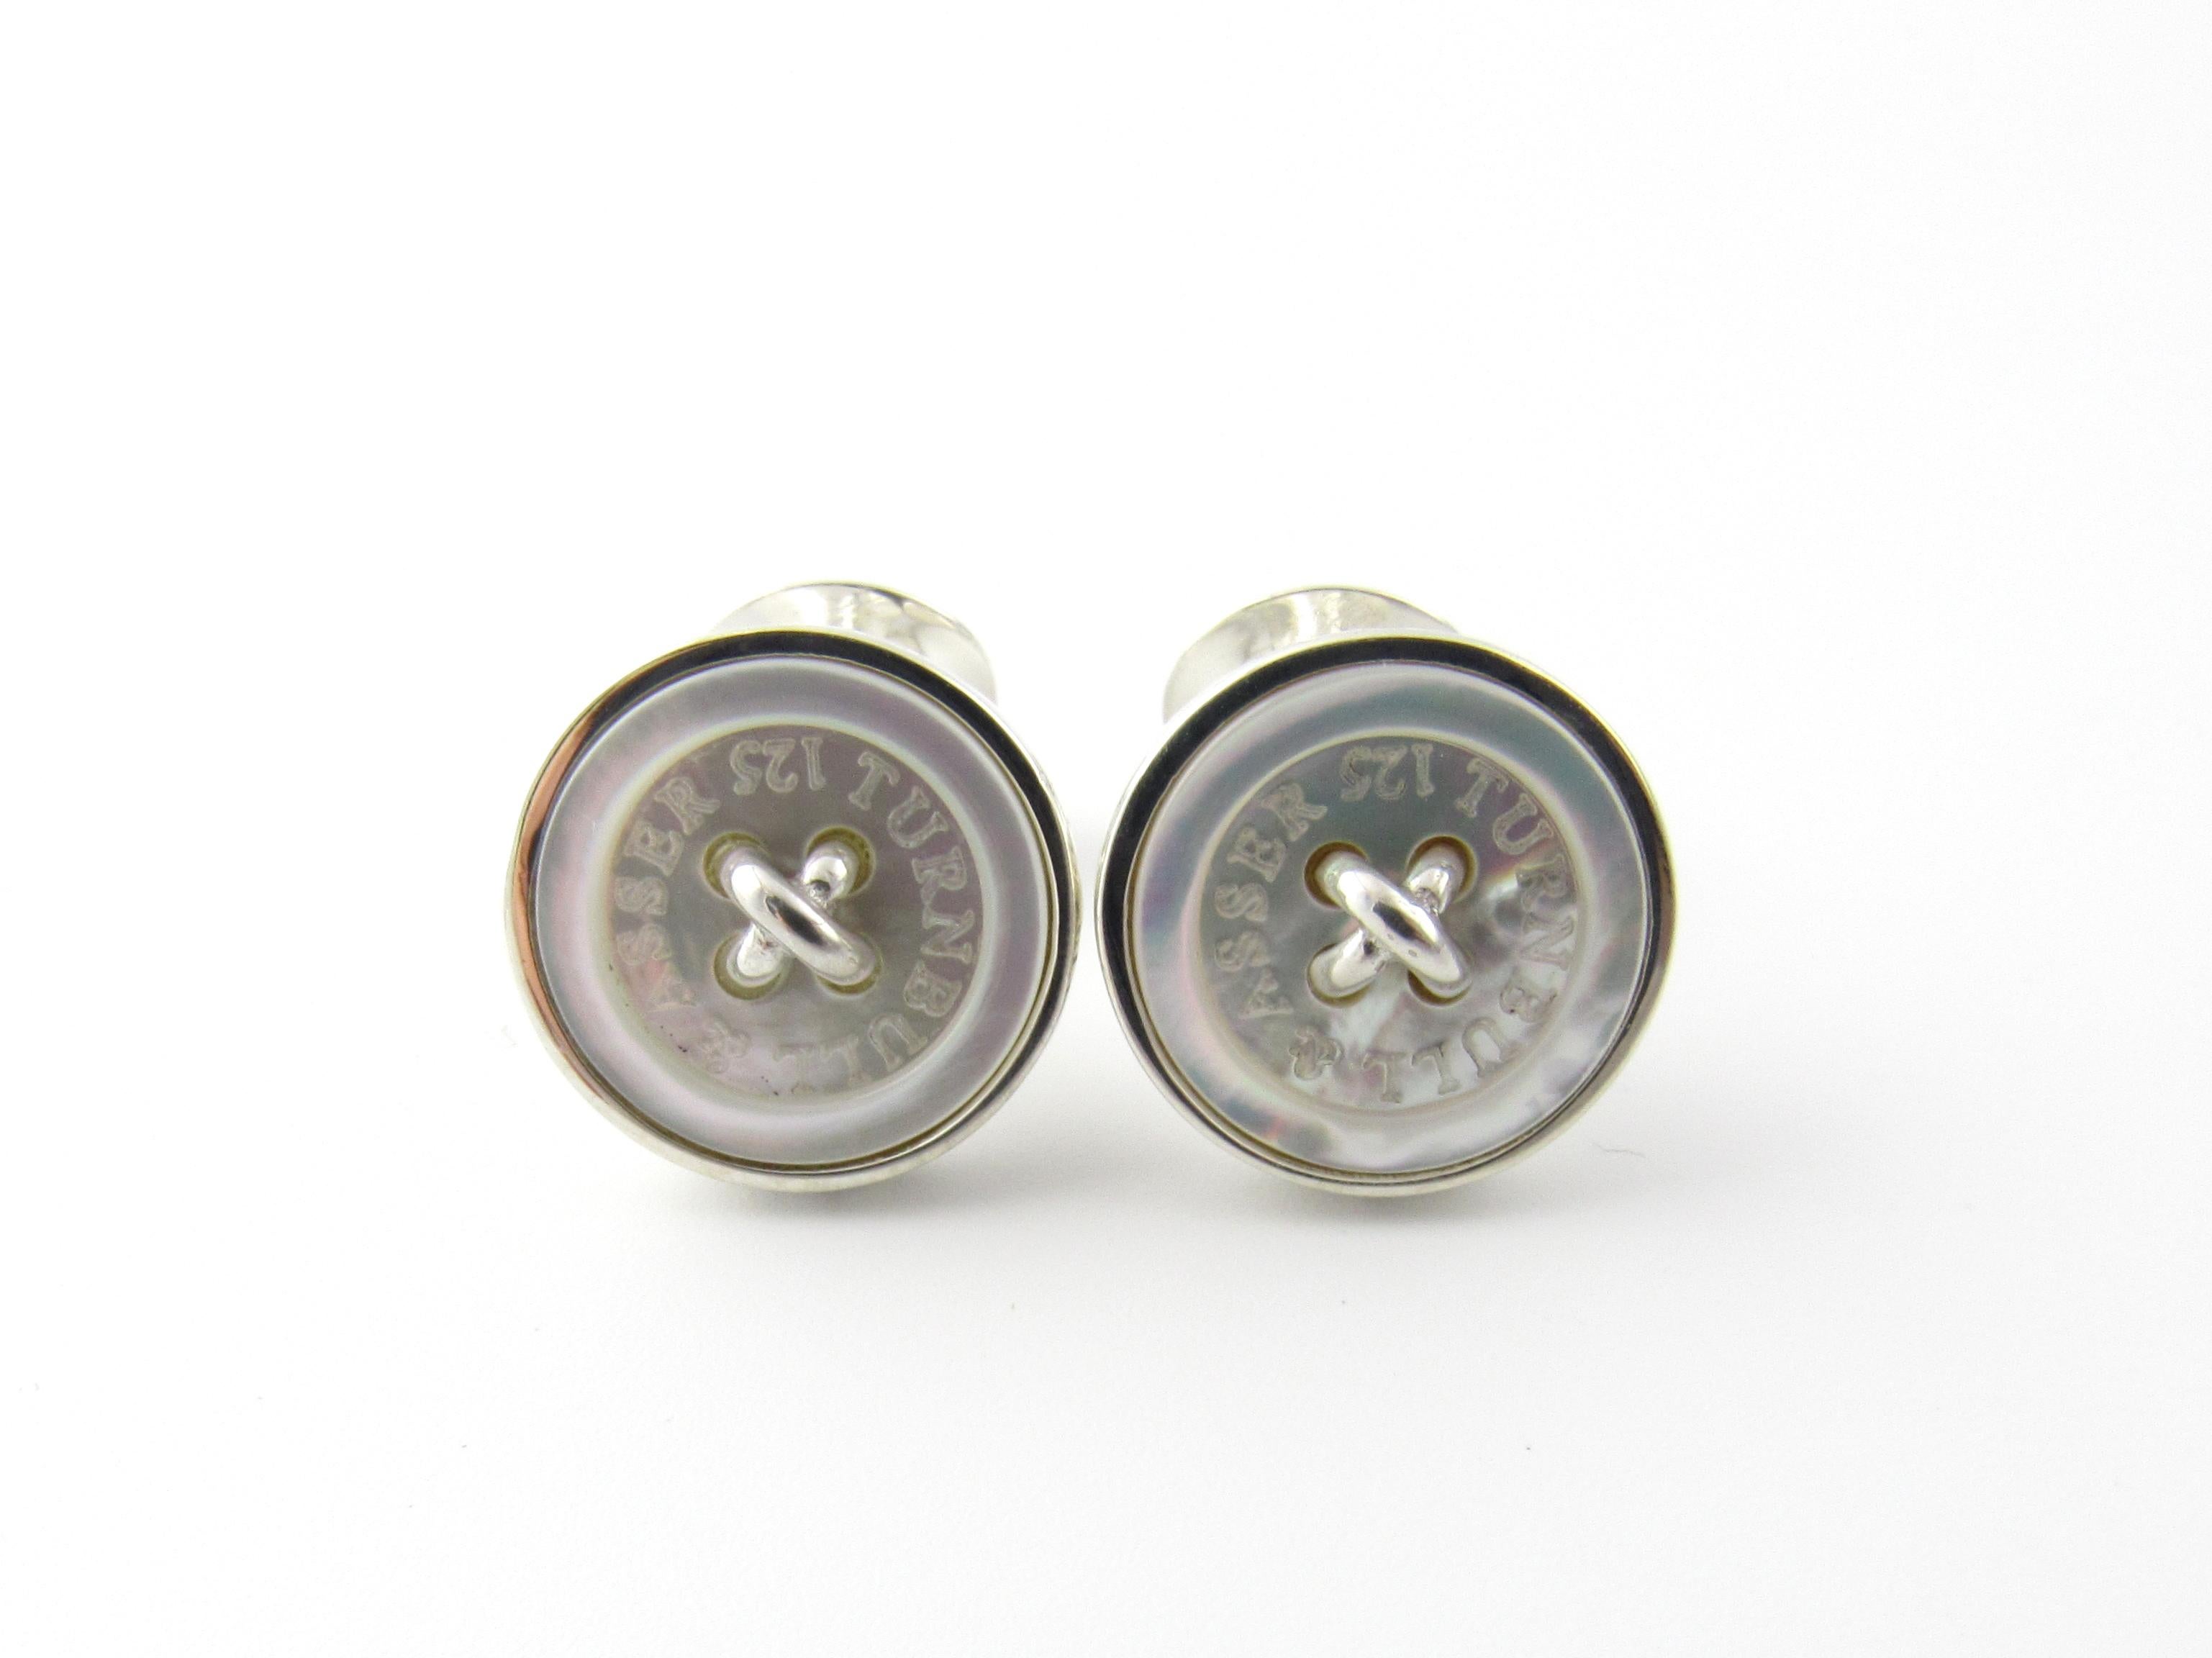 Vintage Turnbull & Asser Sterling Silver and Mother of Pearl Button Cufflinks

These elegant cufflinks each feature a button front design beautifully crafted in mother of pearl and sterling silver. Made in England.

Size: 11 mm

Weight: 11.5 dwt. /